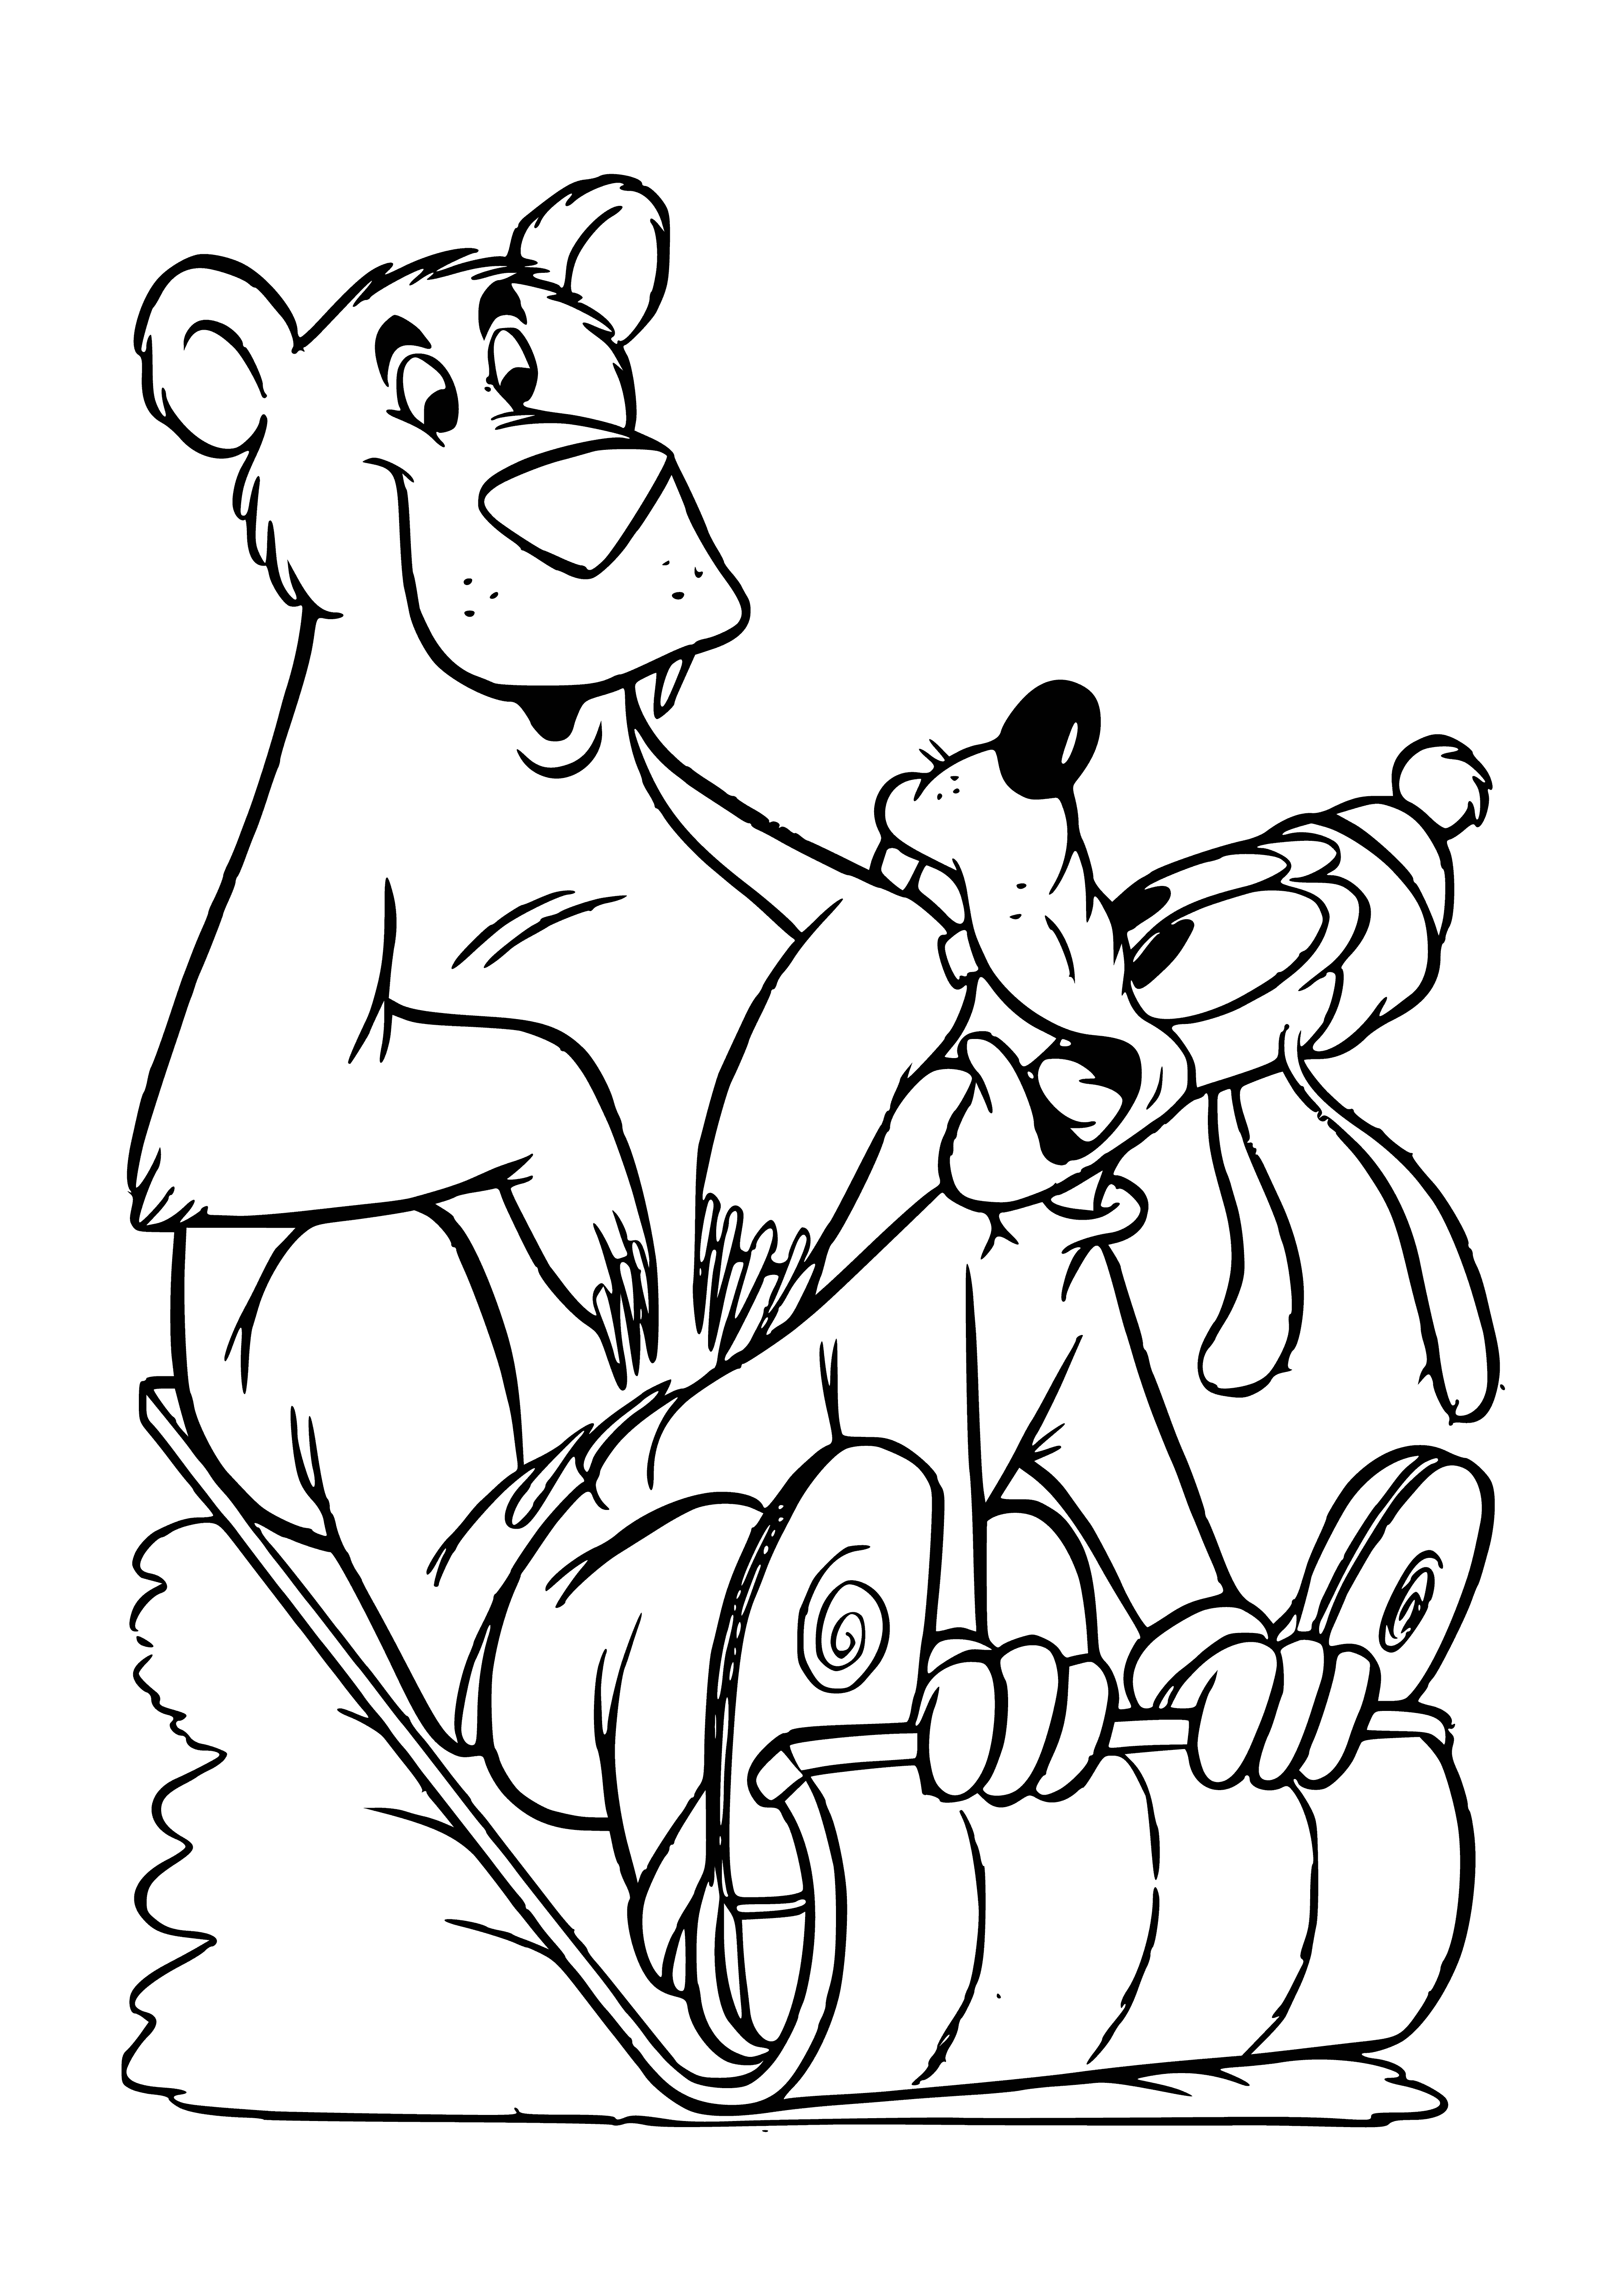 coloring page: Mickey, Donald, and Goofy sled down a hill with winter gear on, having fun!